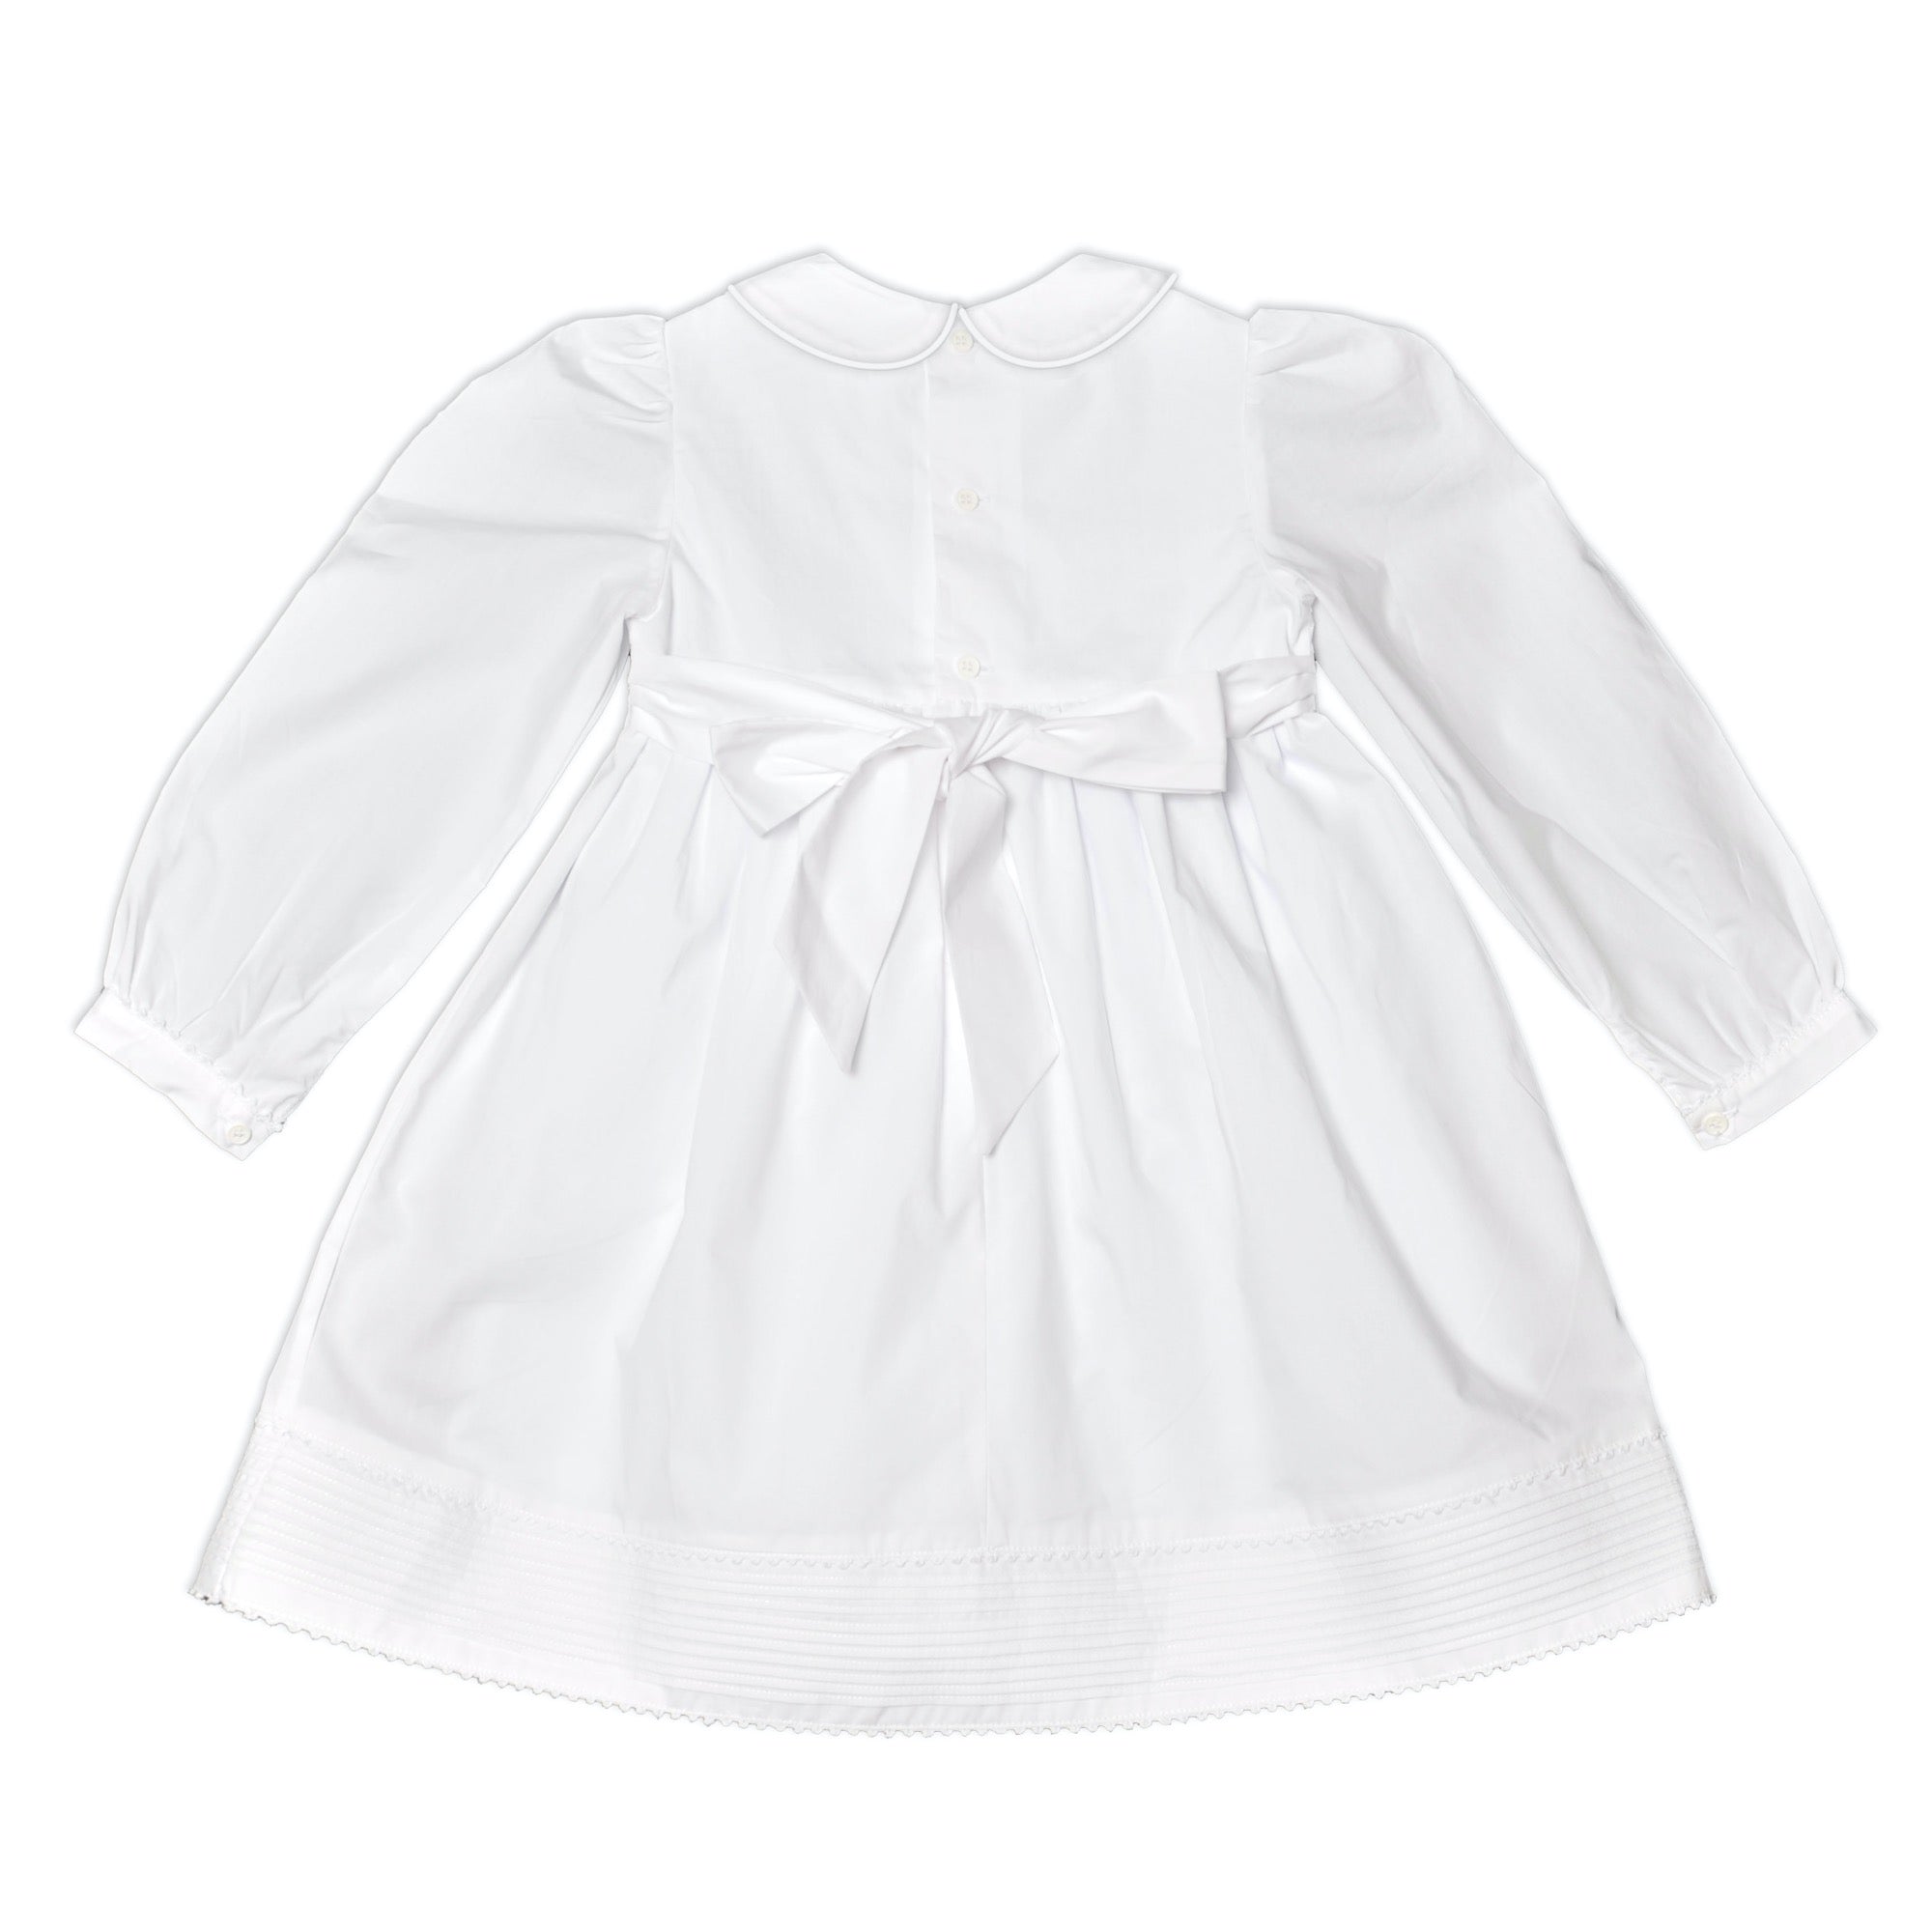 Pleated Long Sleeve Dress In White - Cou Cou Baby